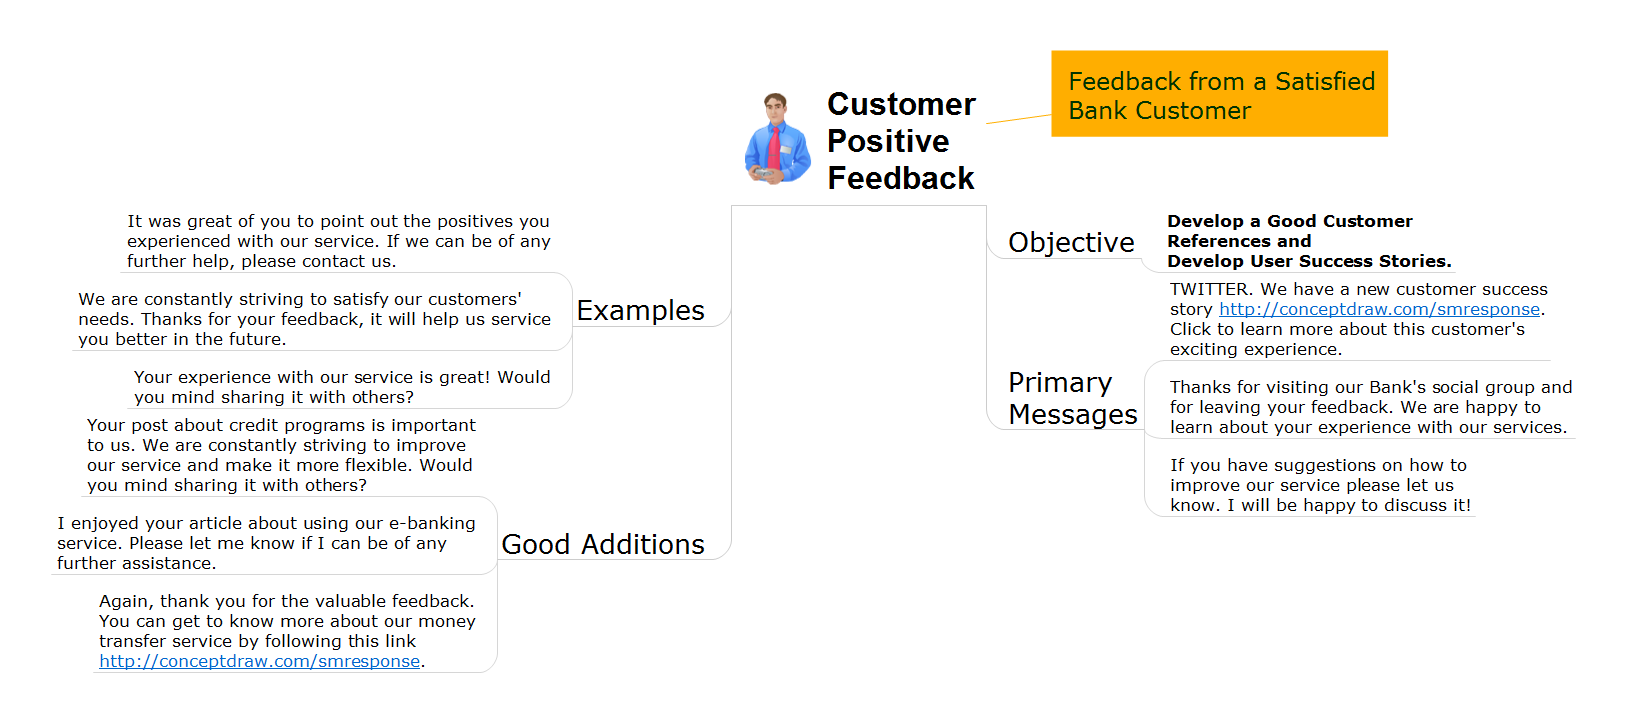 how to respond to positive customer feedback